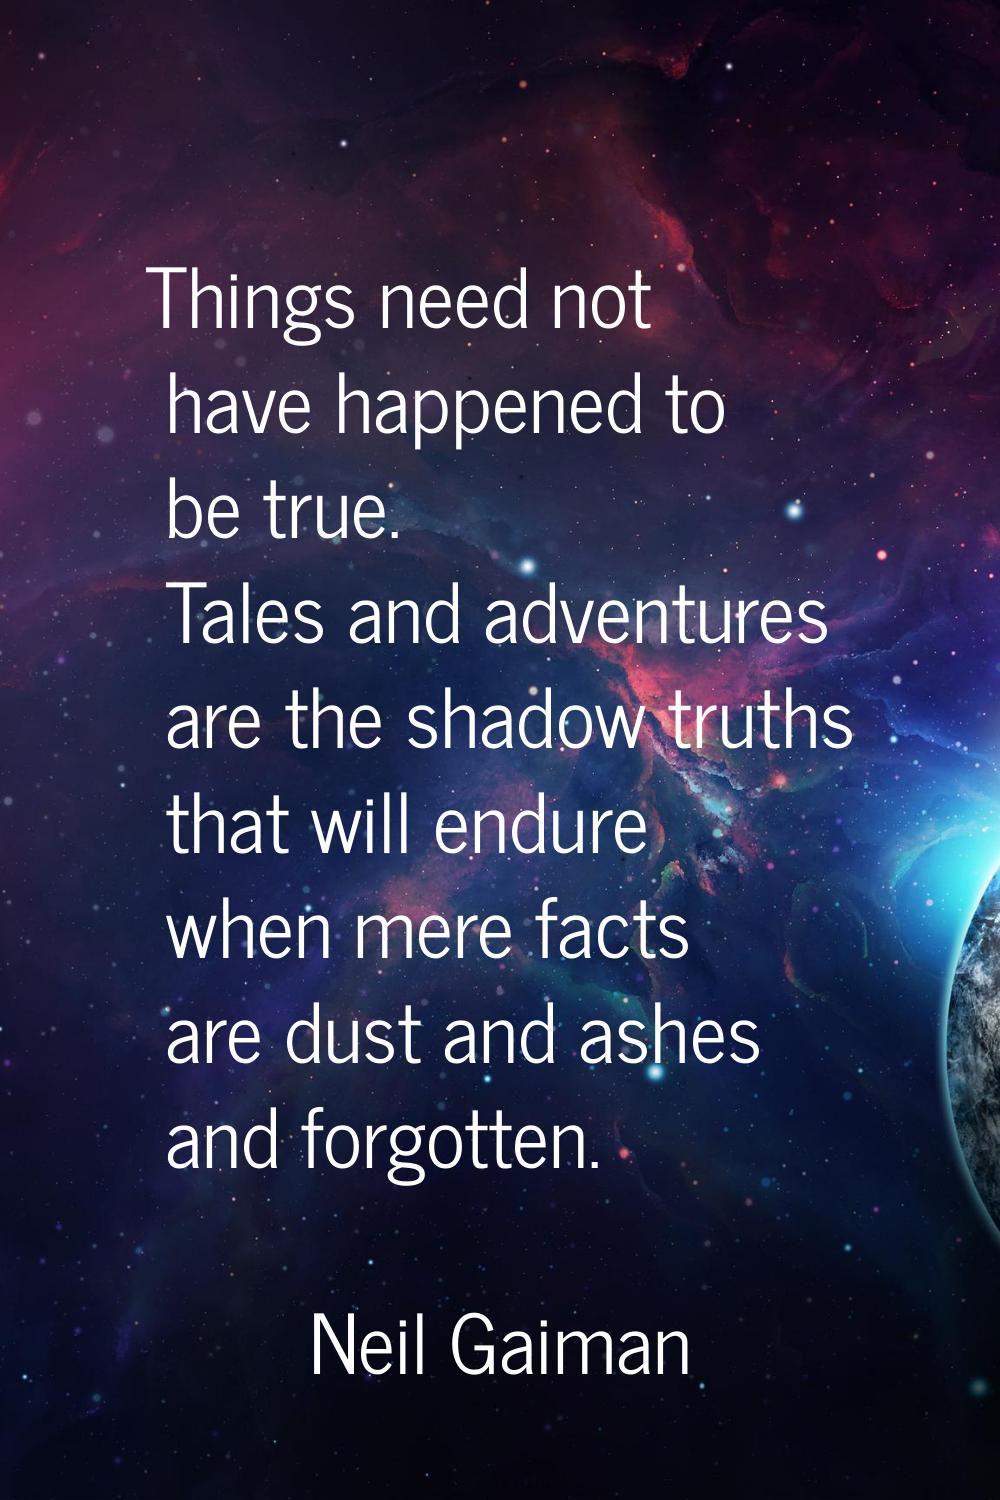 Things need not have happened to be true. Tales and adventures are the shadow truths that will endu